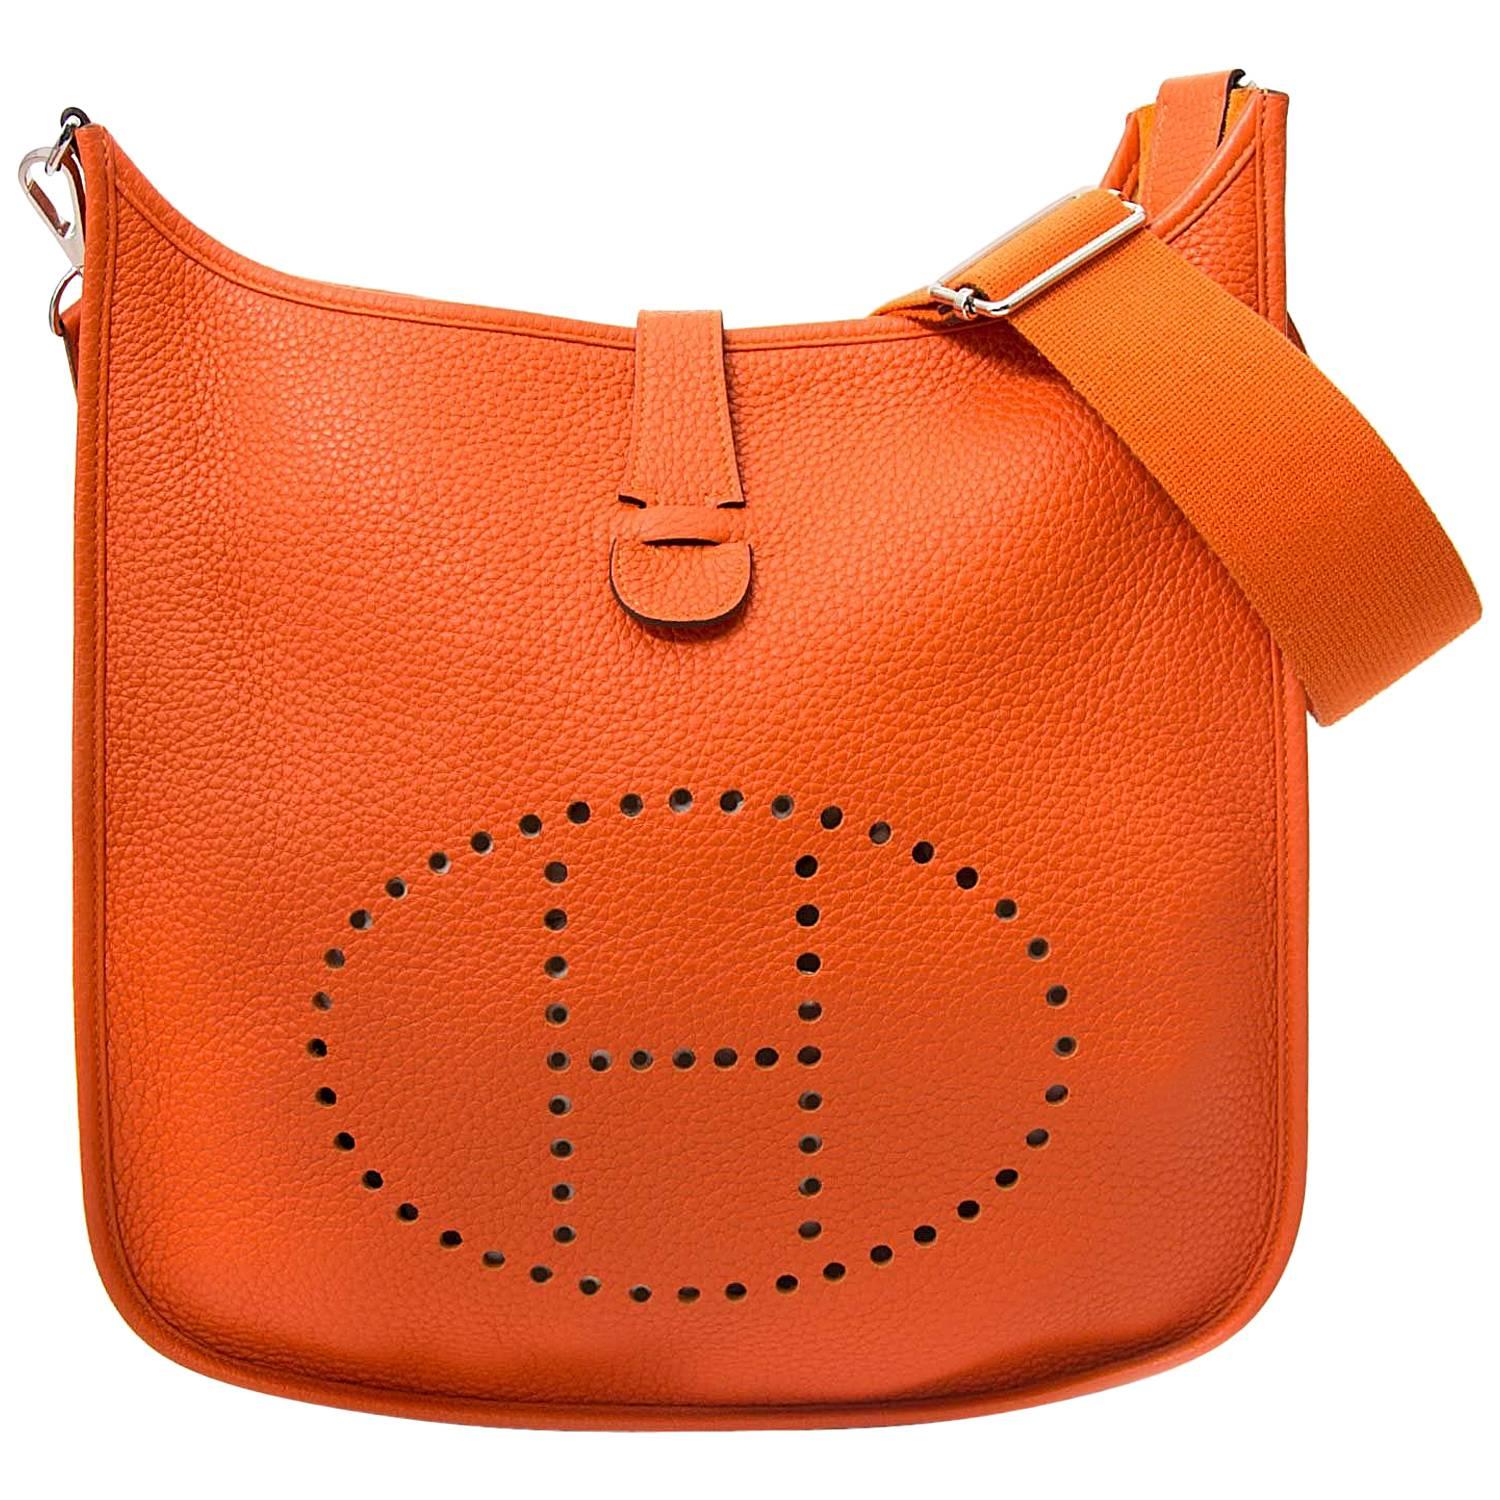 Auth HERMES Evelyne III PM - Ruby Taurillon Clemence T Shoulder Bag